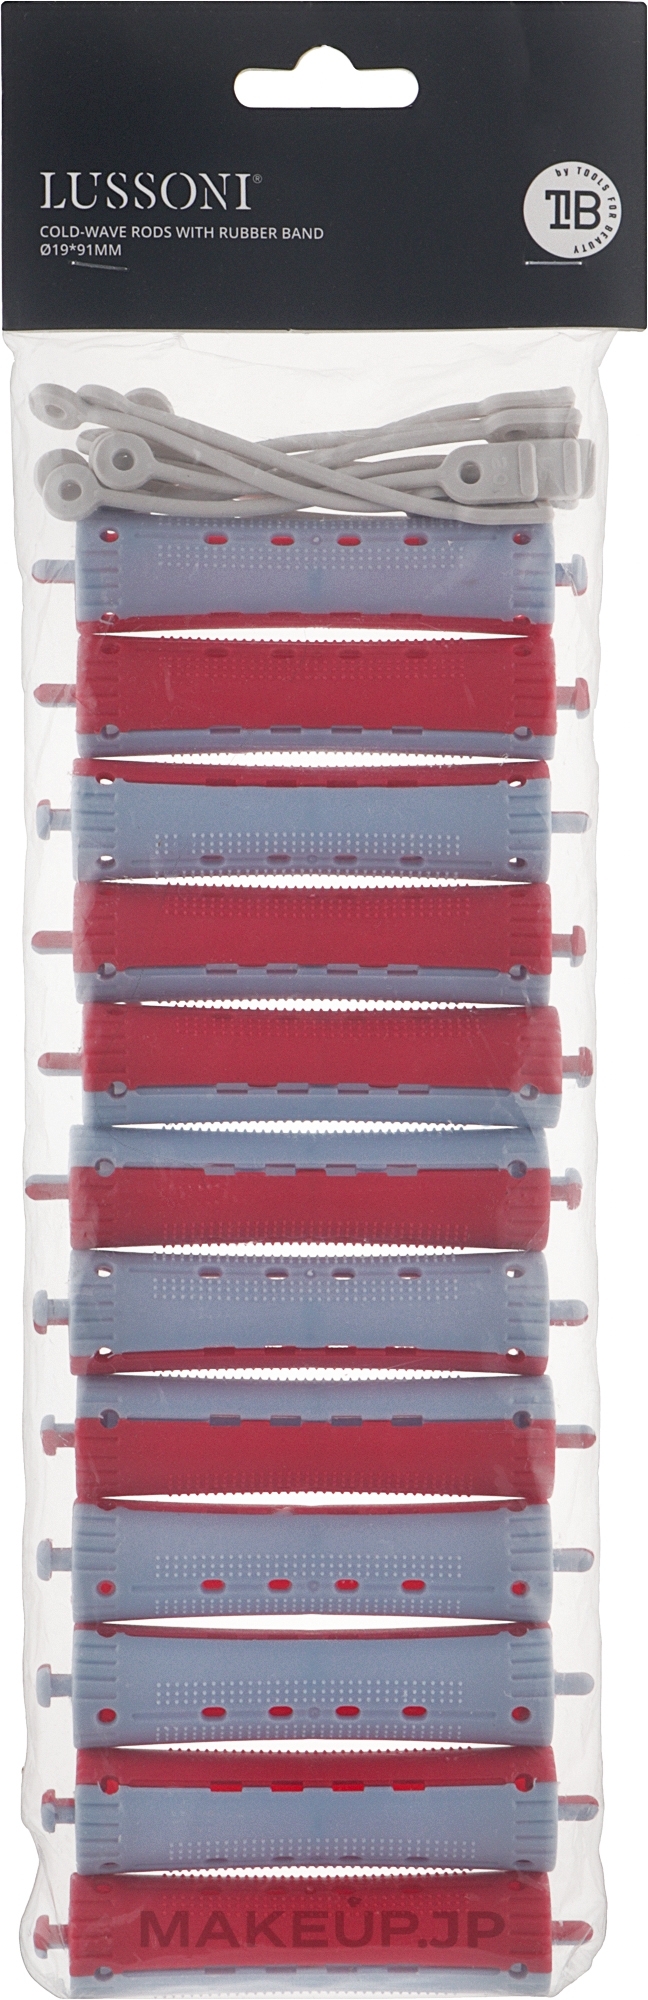 Hair Curlers O19x91 mm, red-blue - Lussoni Cold-Wave Rods With Rubber Band — photo 12 szt.